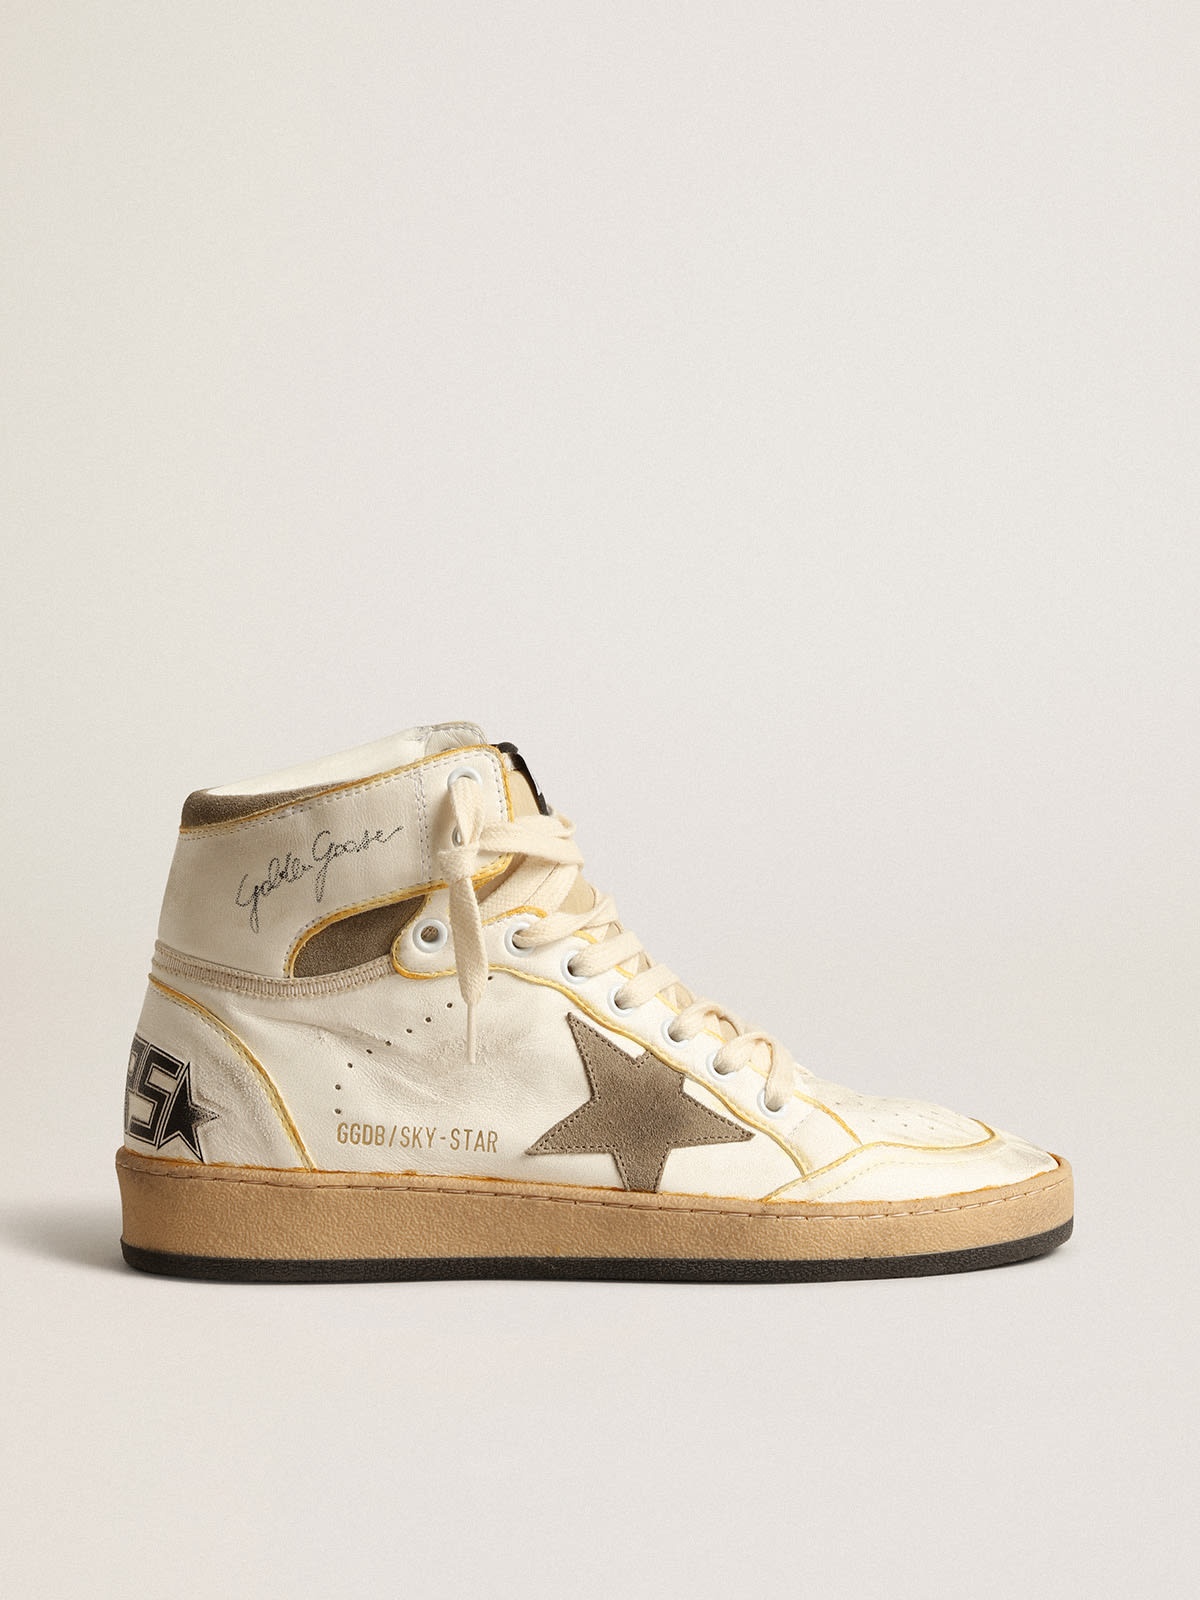 Men’s Sky-Star in white nappa leather with dove-gray suede star - 1